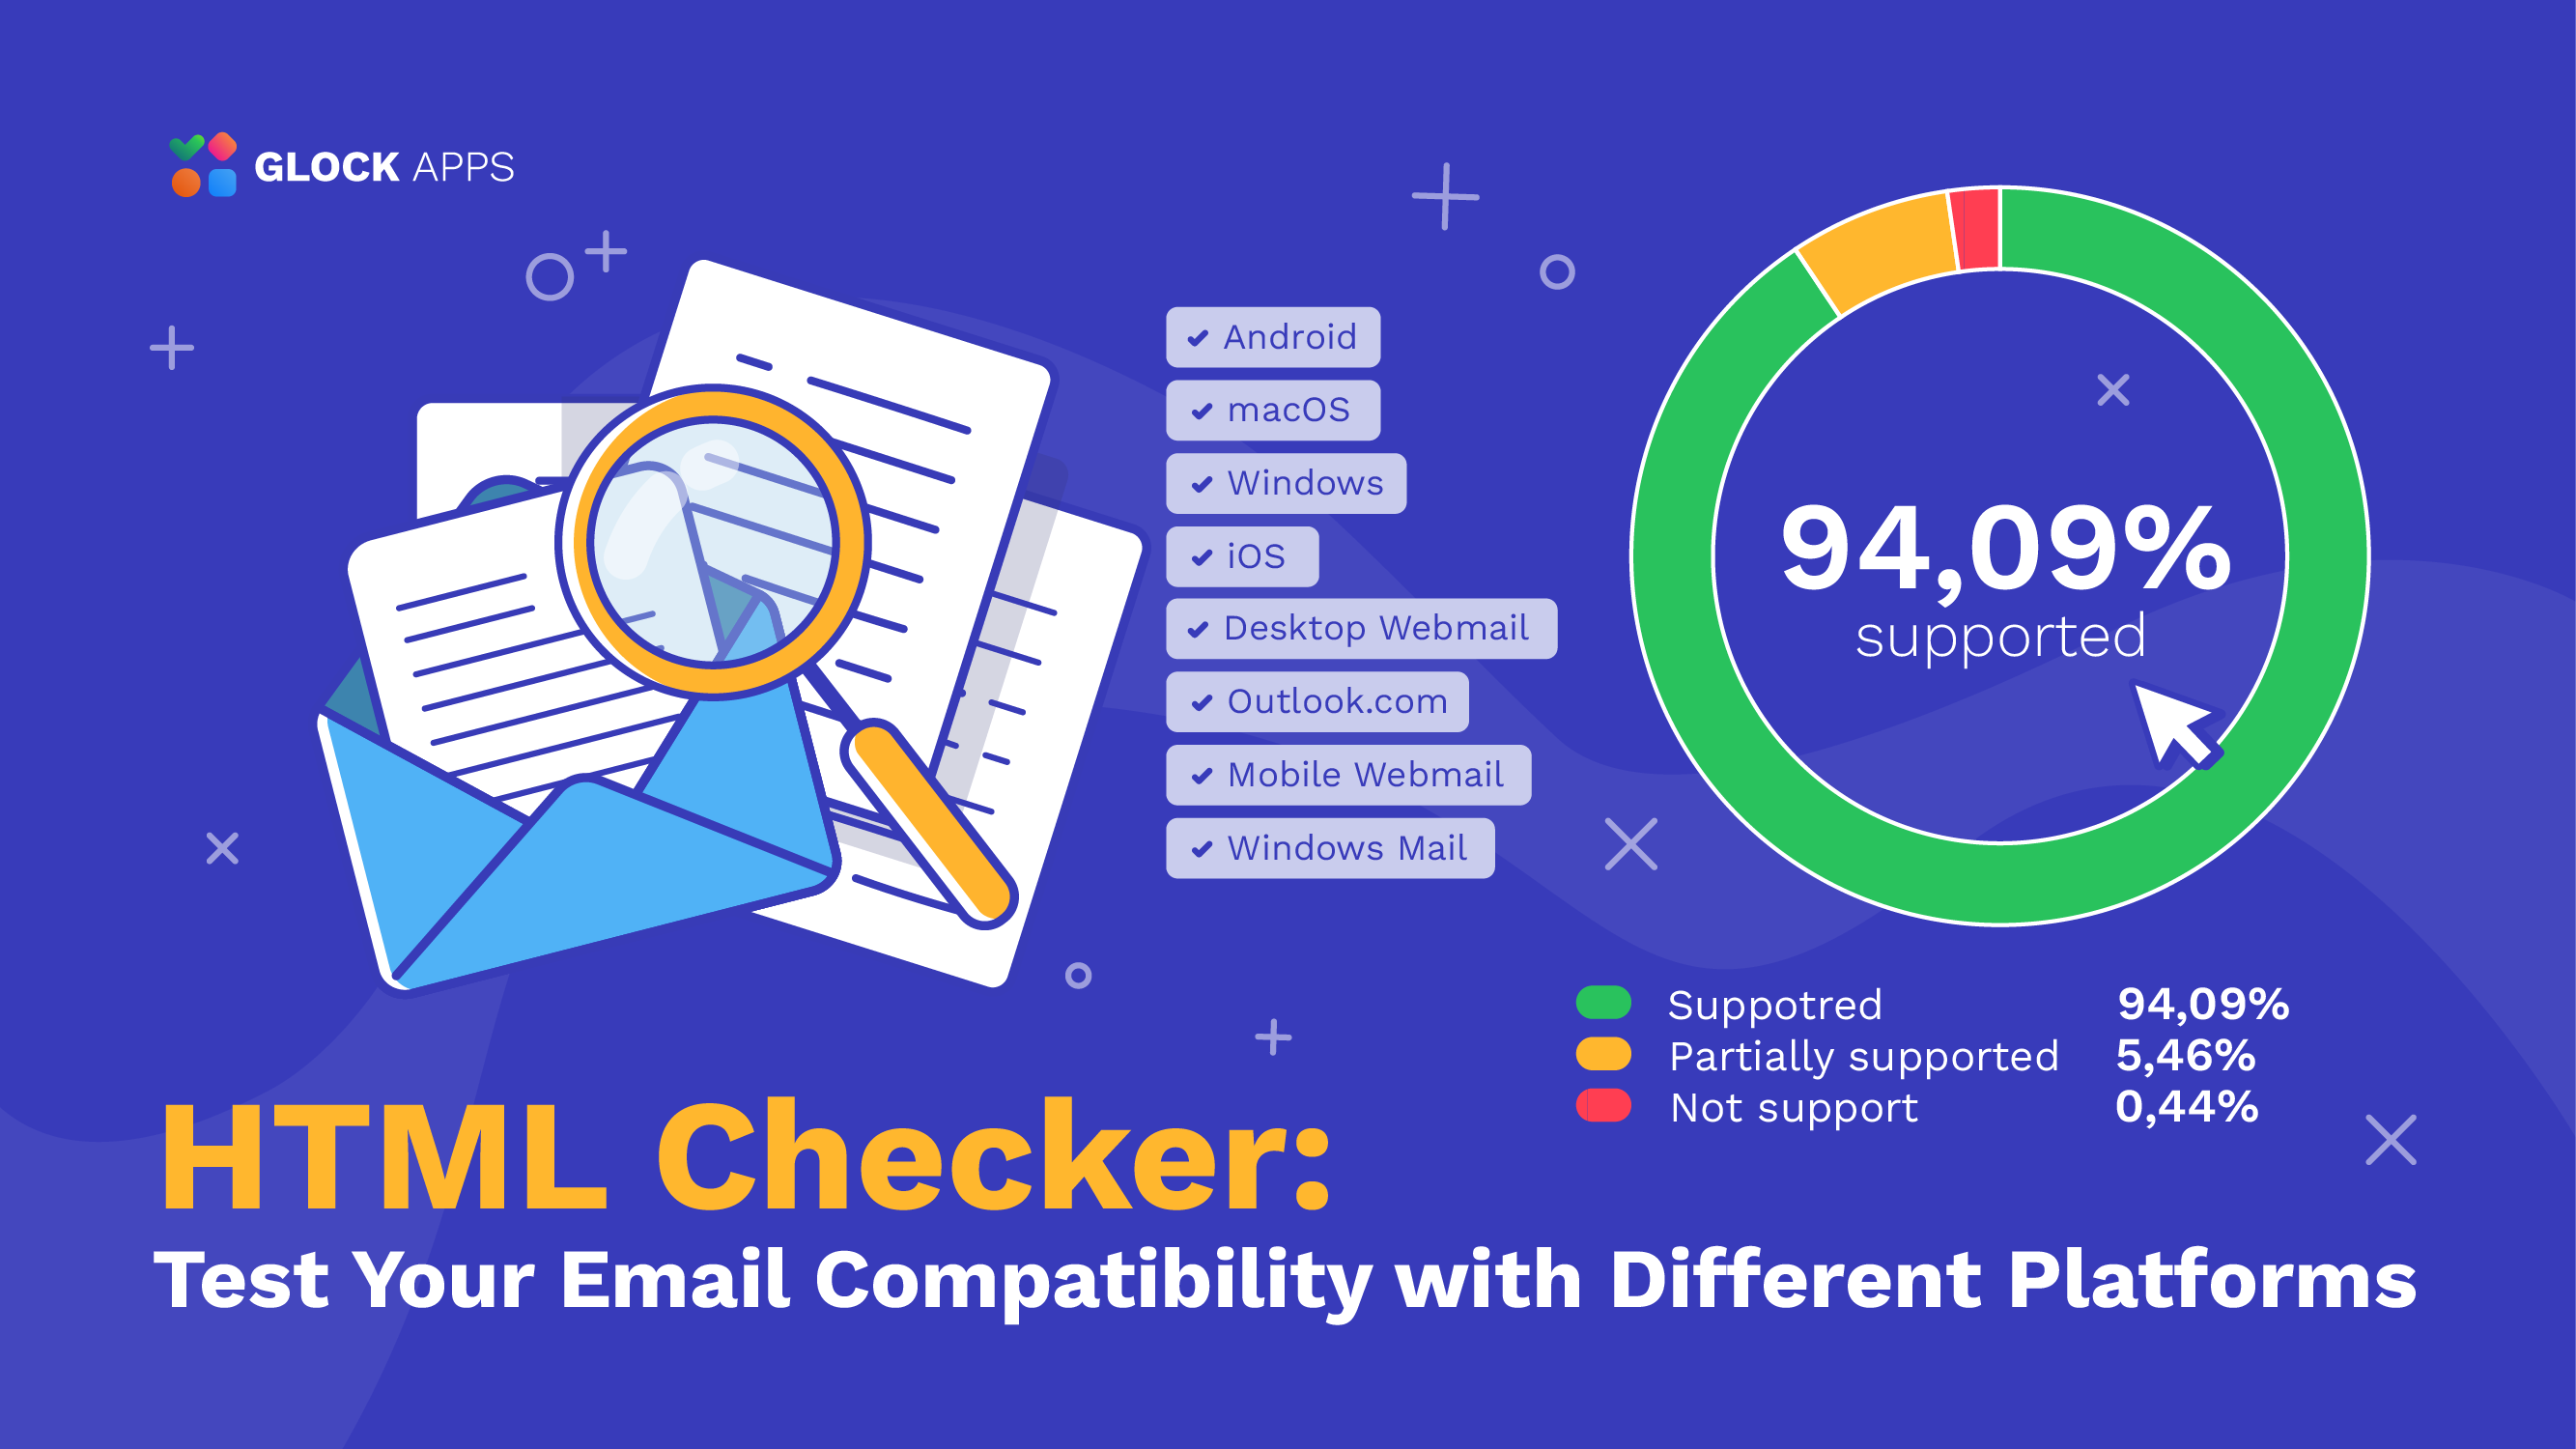 glockapps:-html-checker:-test-your-email-compatibility-with-different-platforms